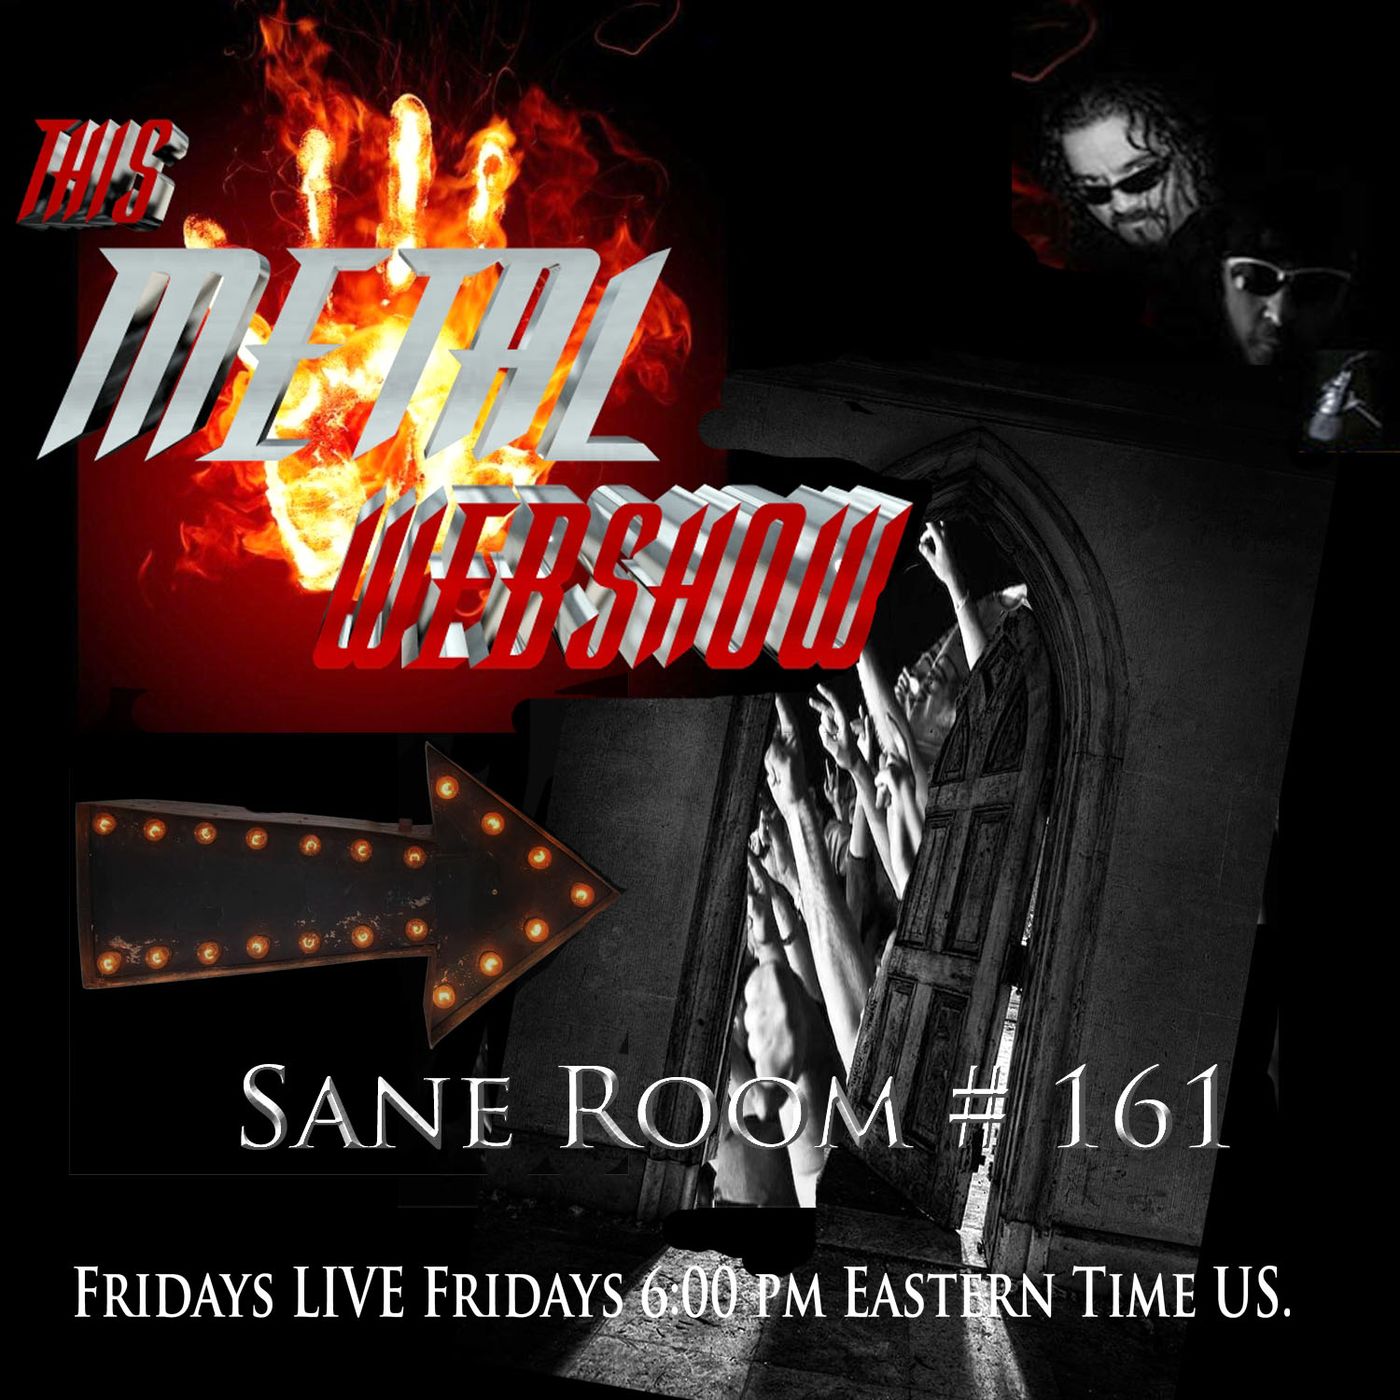 This Metal Webshow Sane Room # 161 LIVE